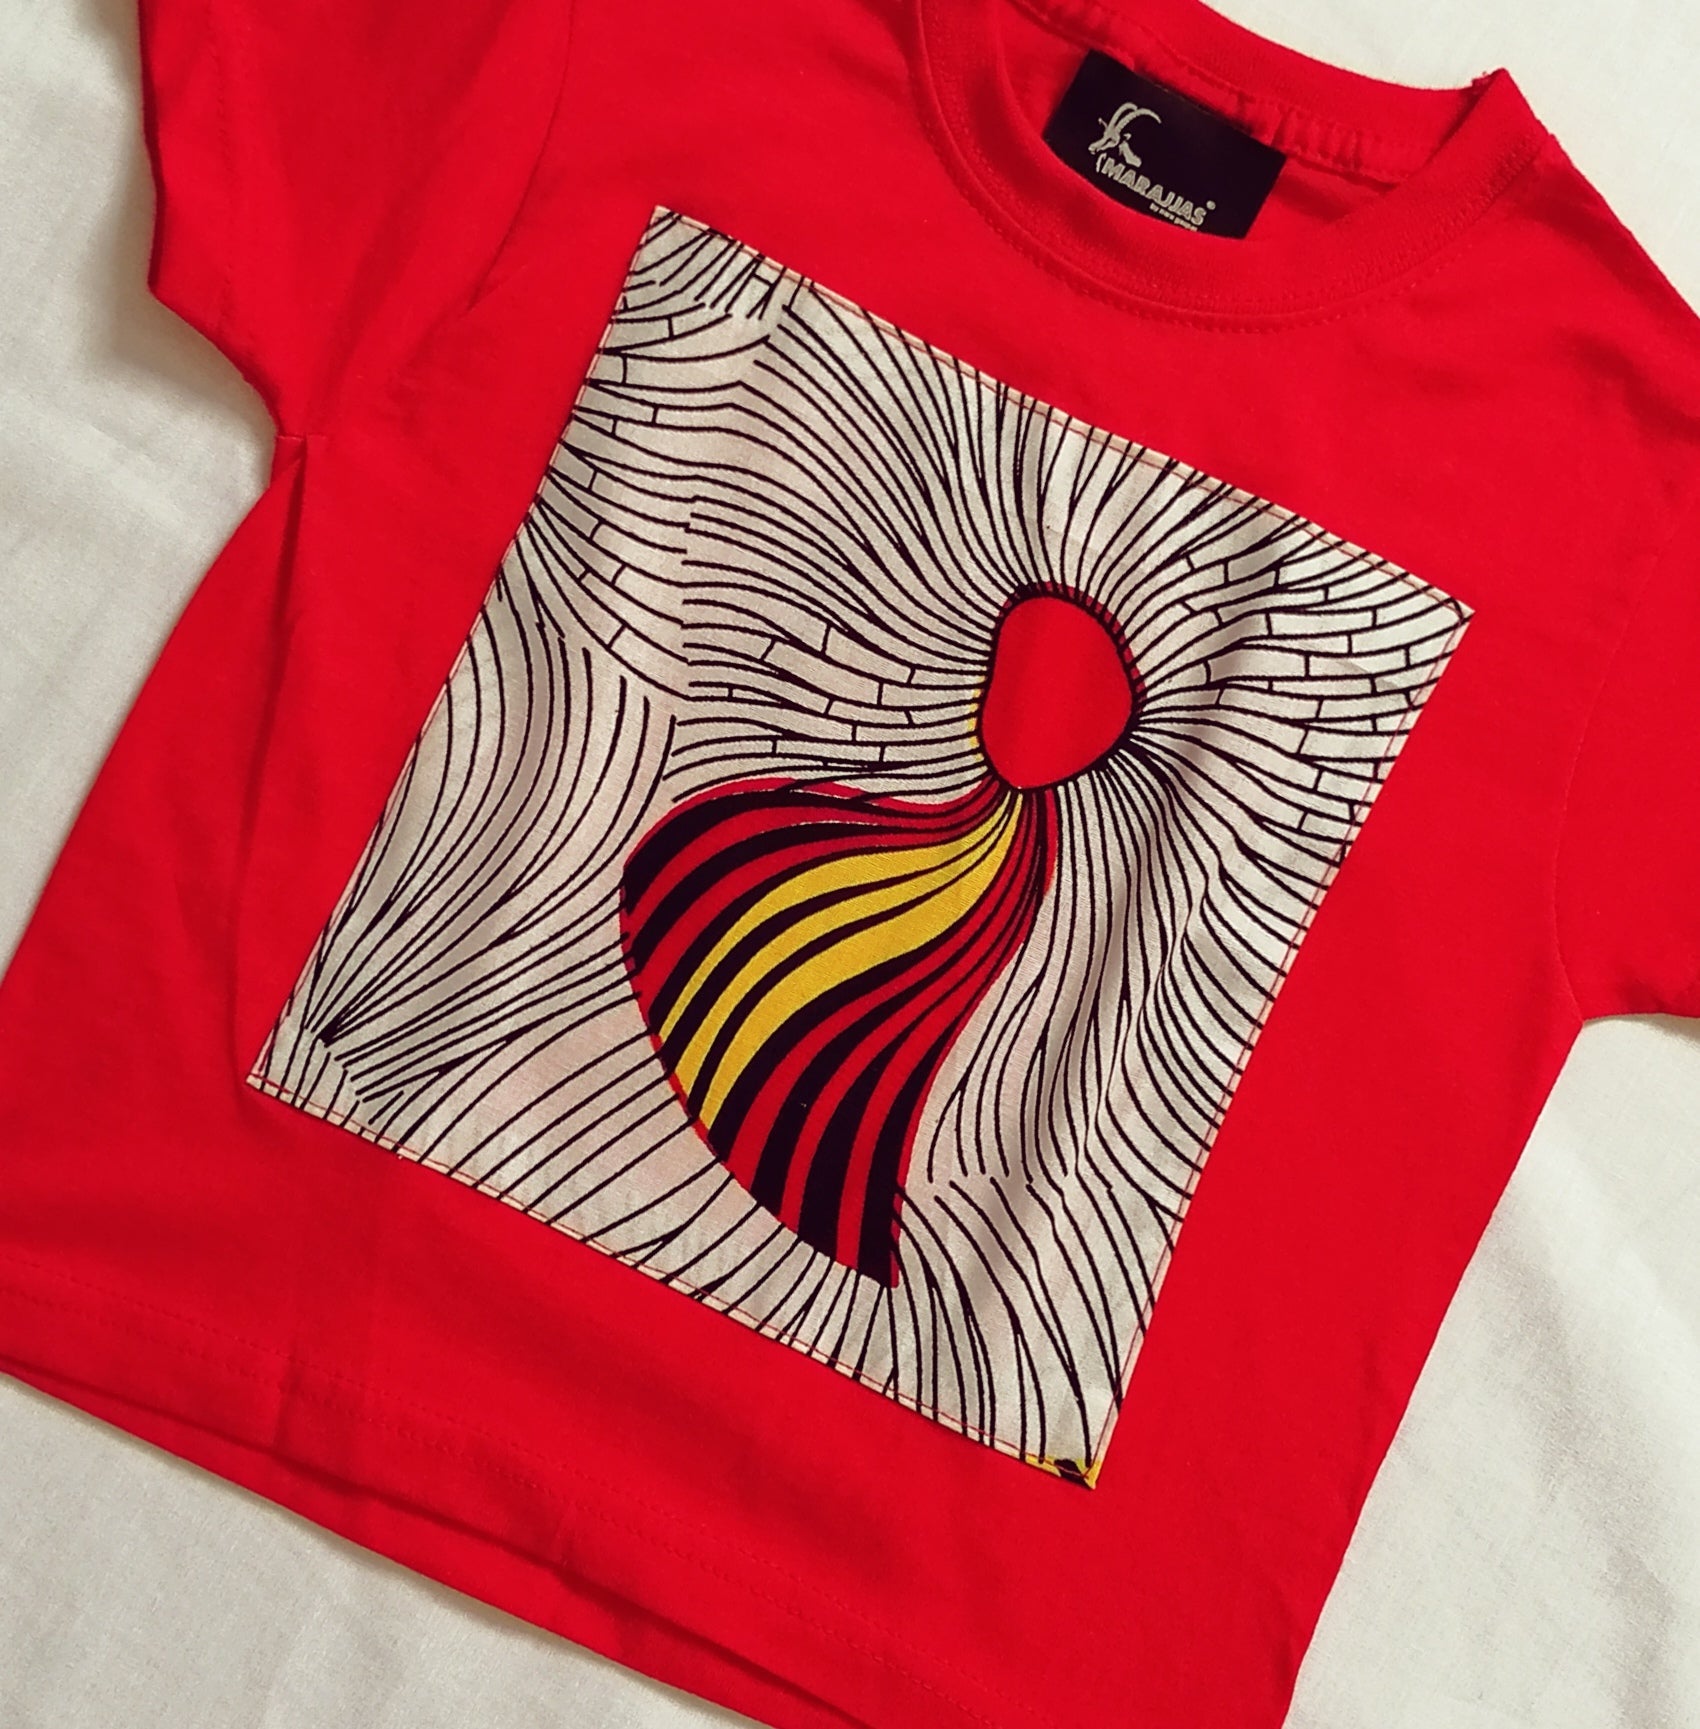 T-shirt in red with Ankara - British D'sire